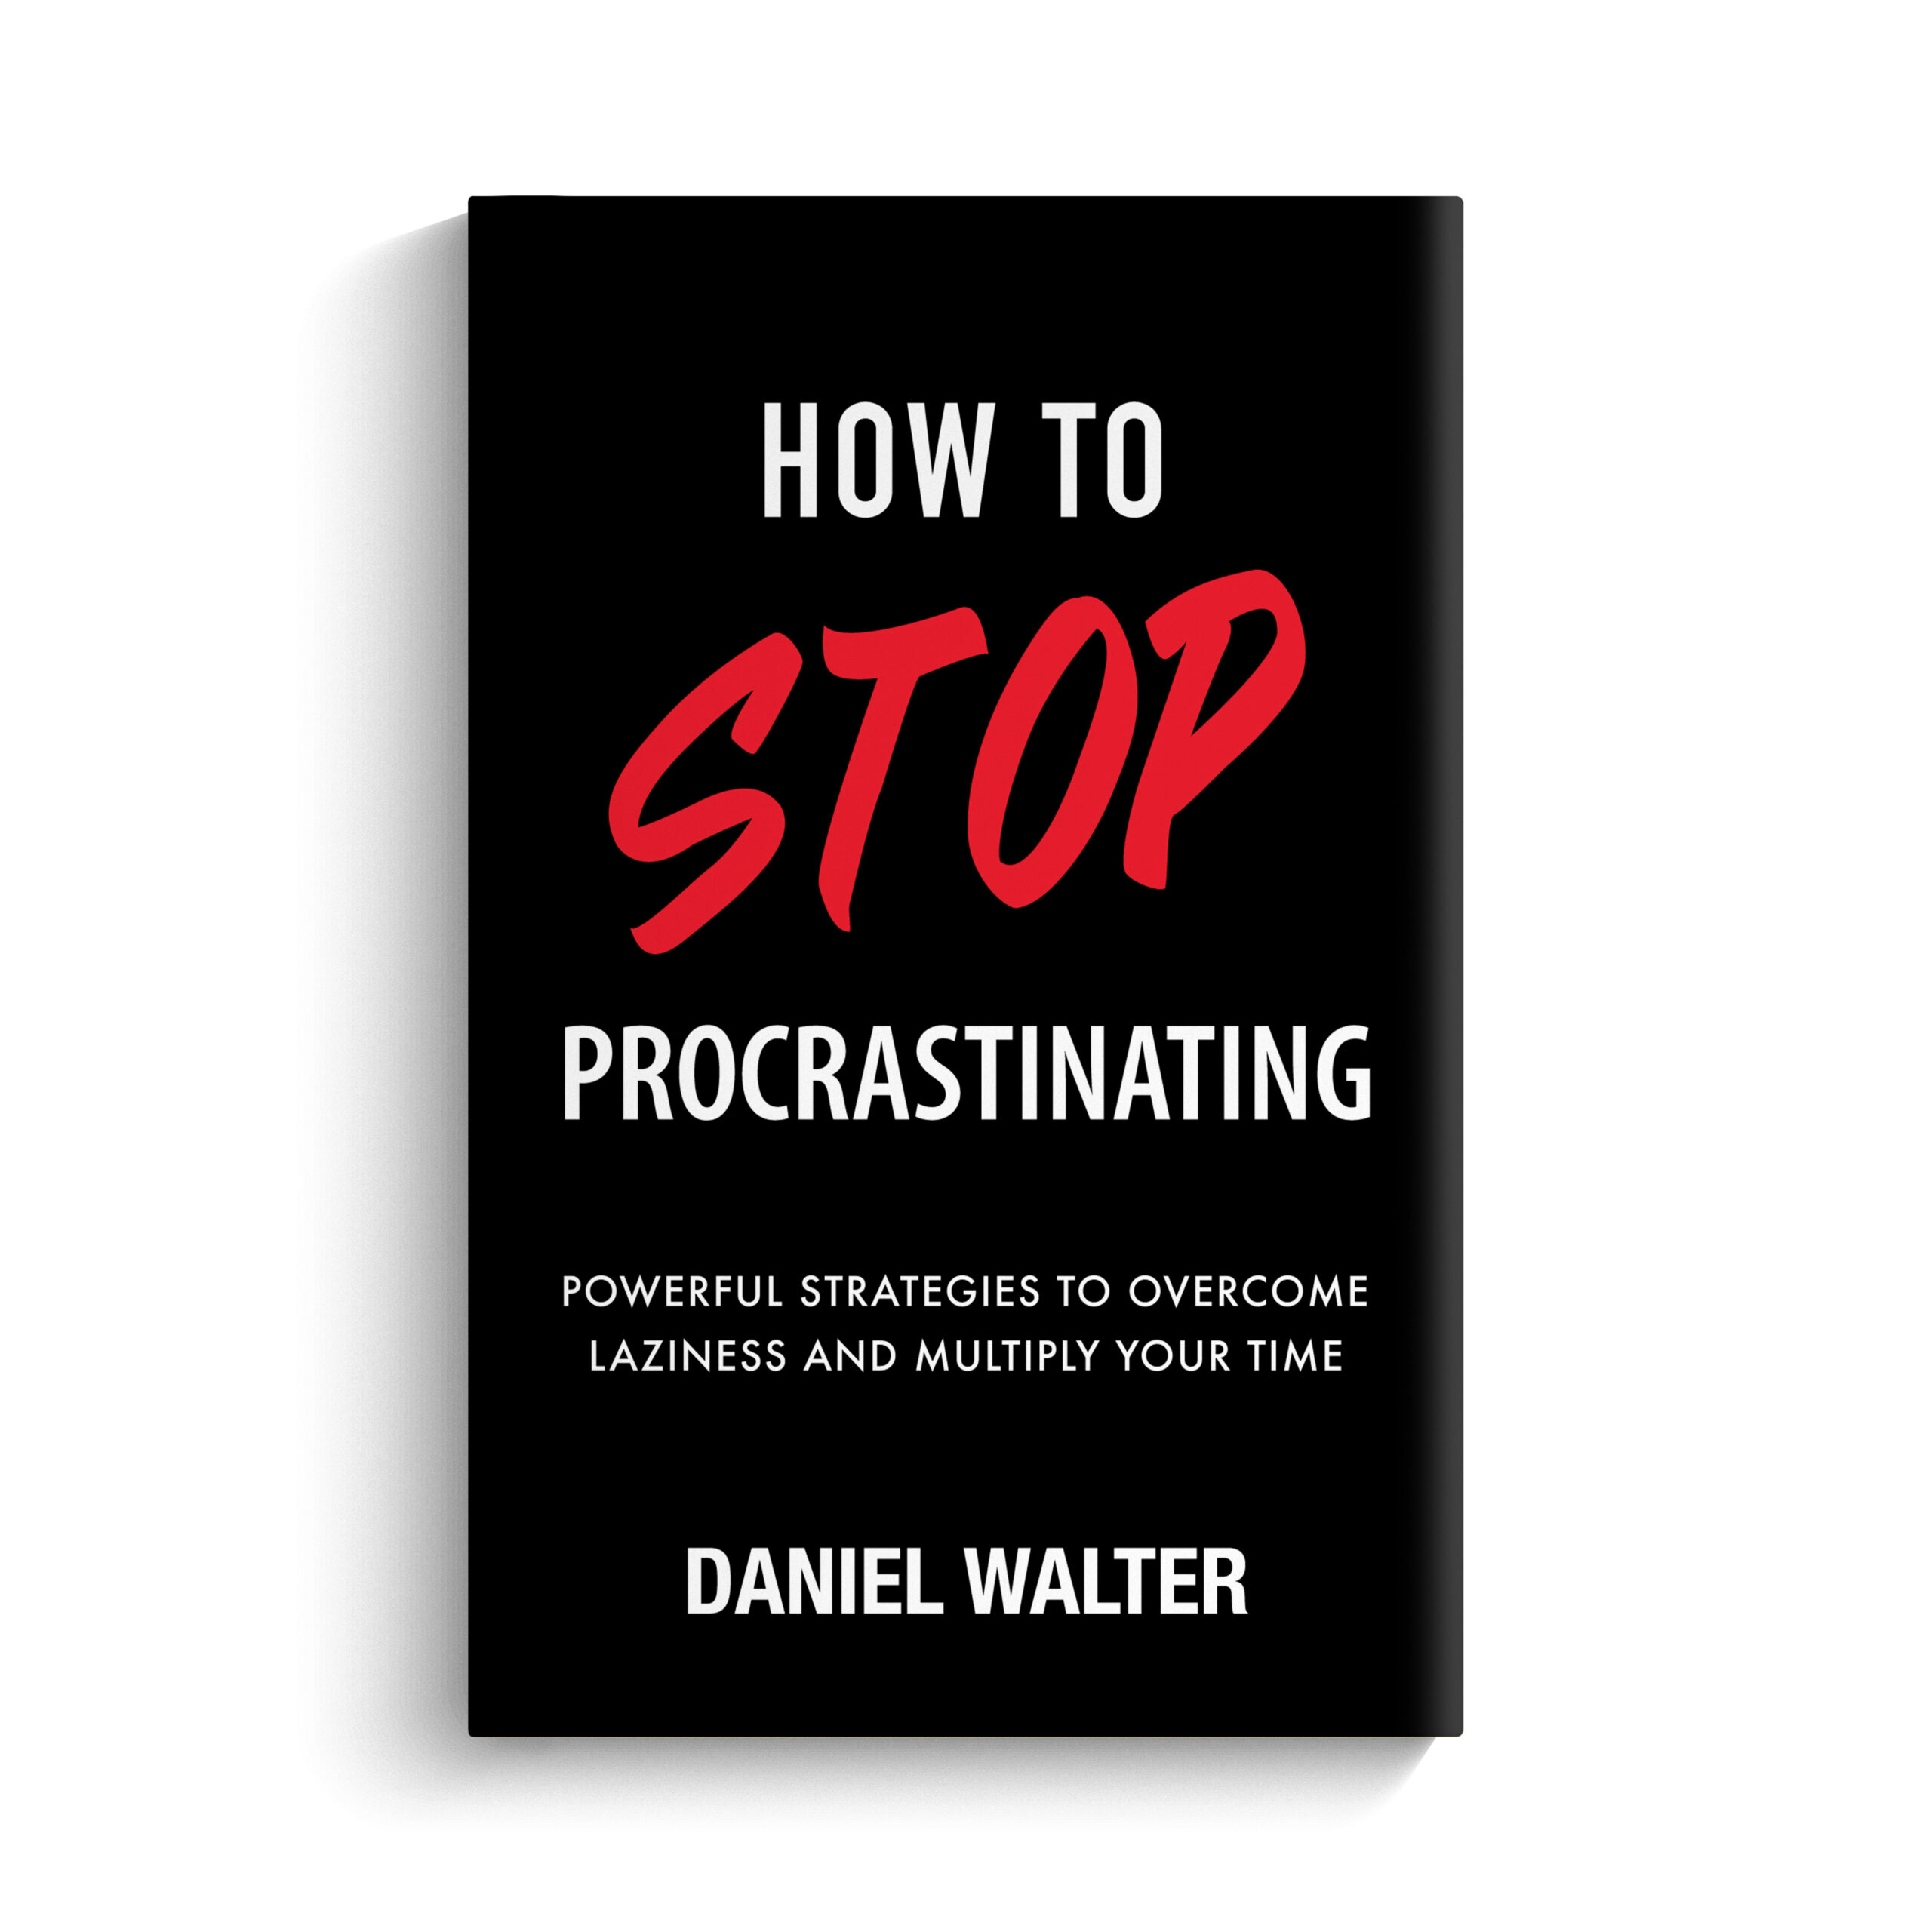 How to Stop Procrastinating by Daniel Walter